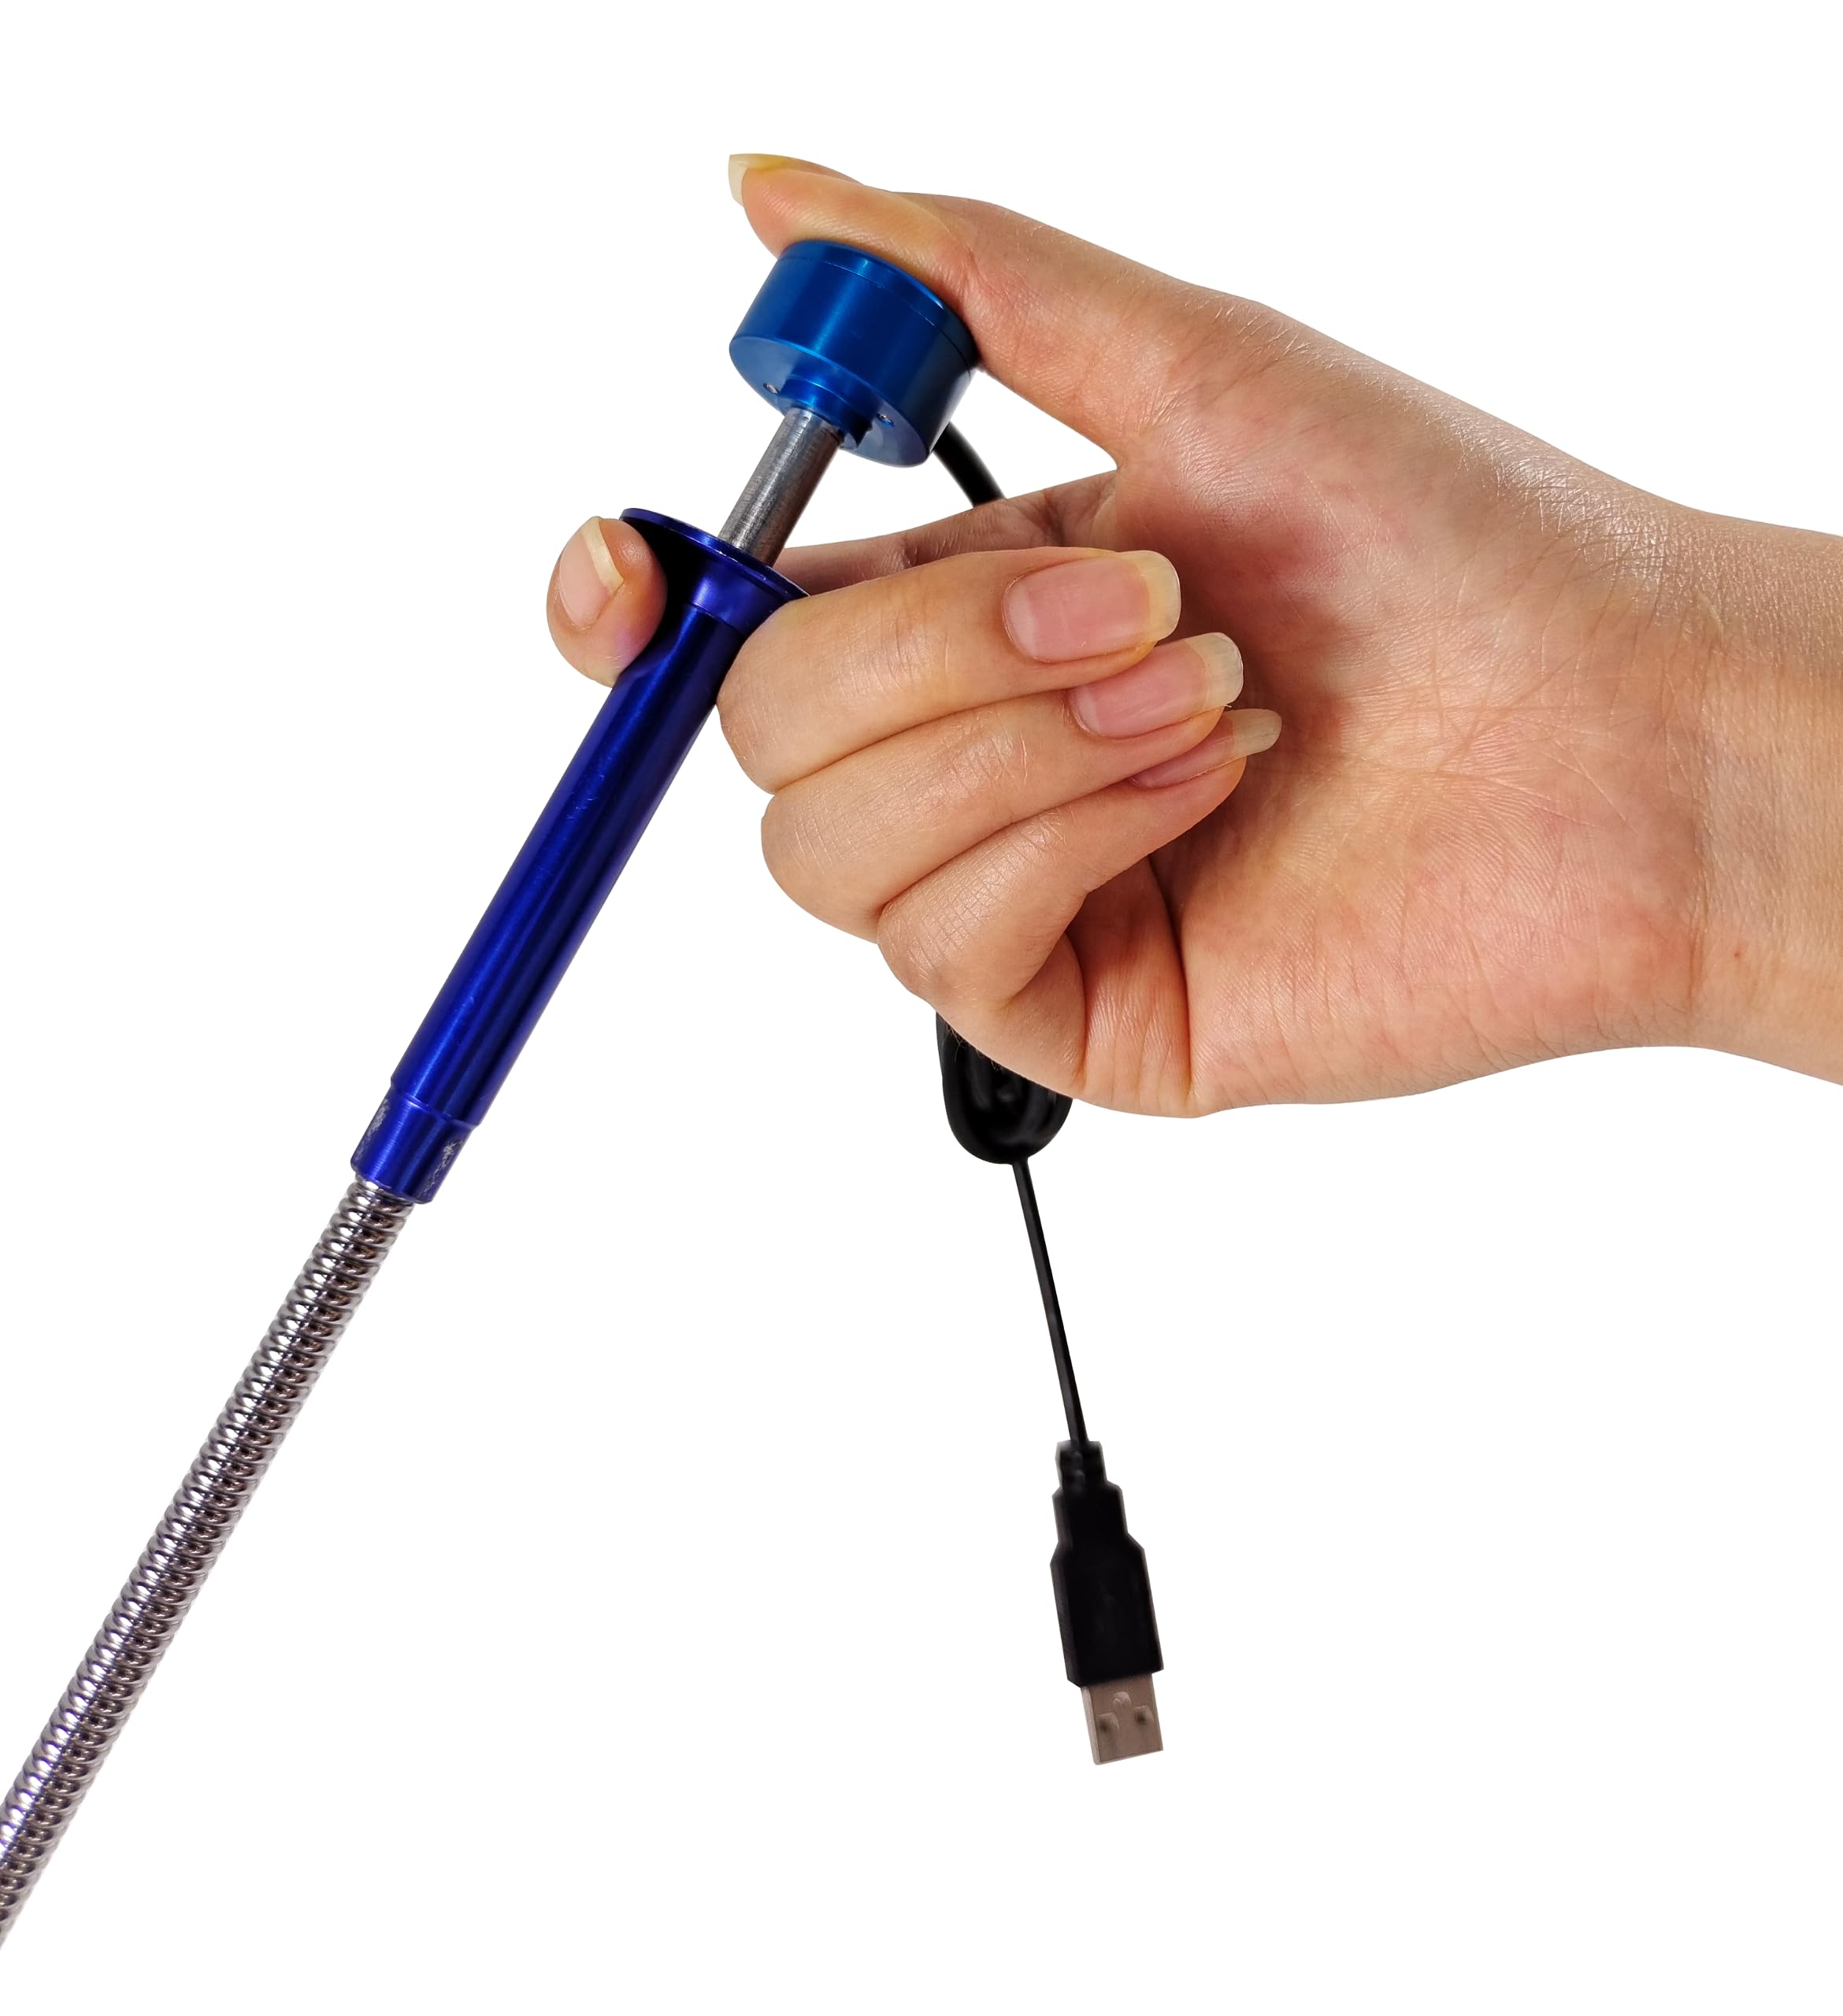 Vividia Visual Grabber 4-Claw Flexible Retrieving Pickup Tool with Built-in USB HD Camera and LED Lights (8mm Diameter Camera Head and 3ft Long Probe)